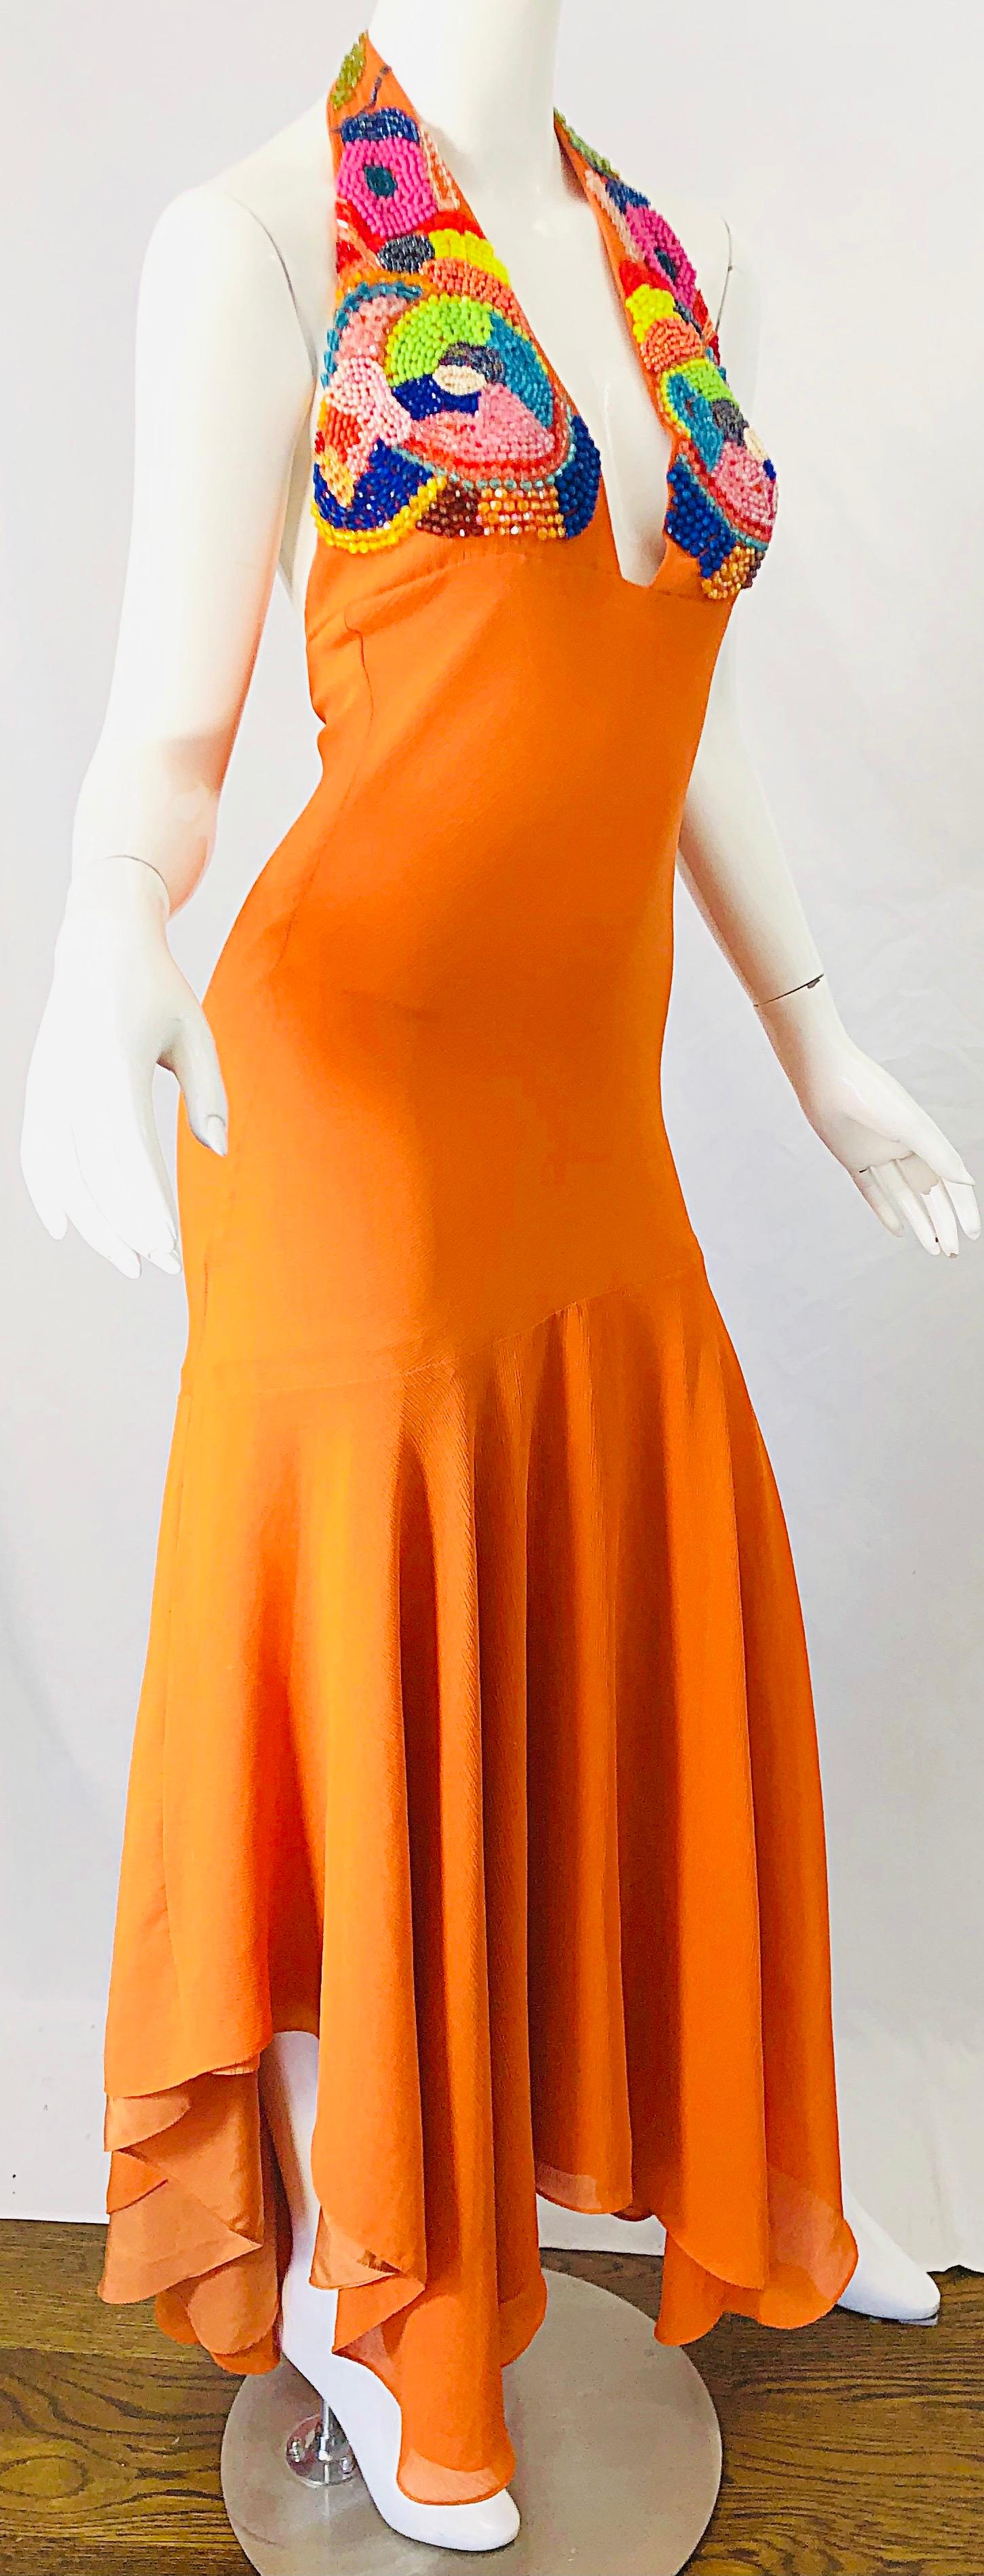 1990s Does 1970s Bright Orange Beads Crepe Chiffon Handkerchief Hem Halter Dress In Excellent Condition For Sale In San Diego, CA